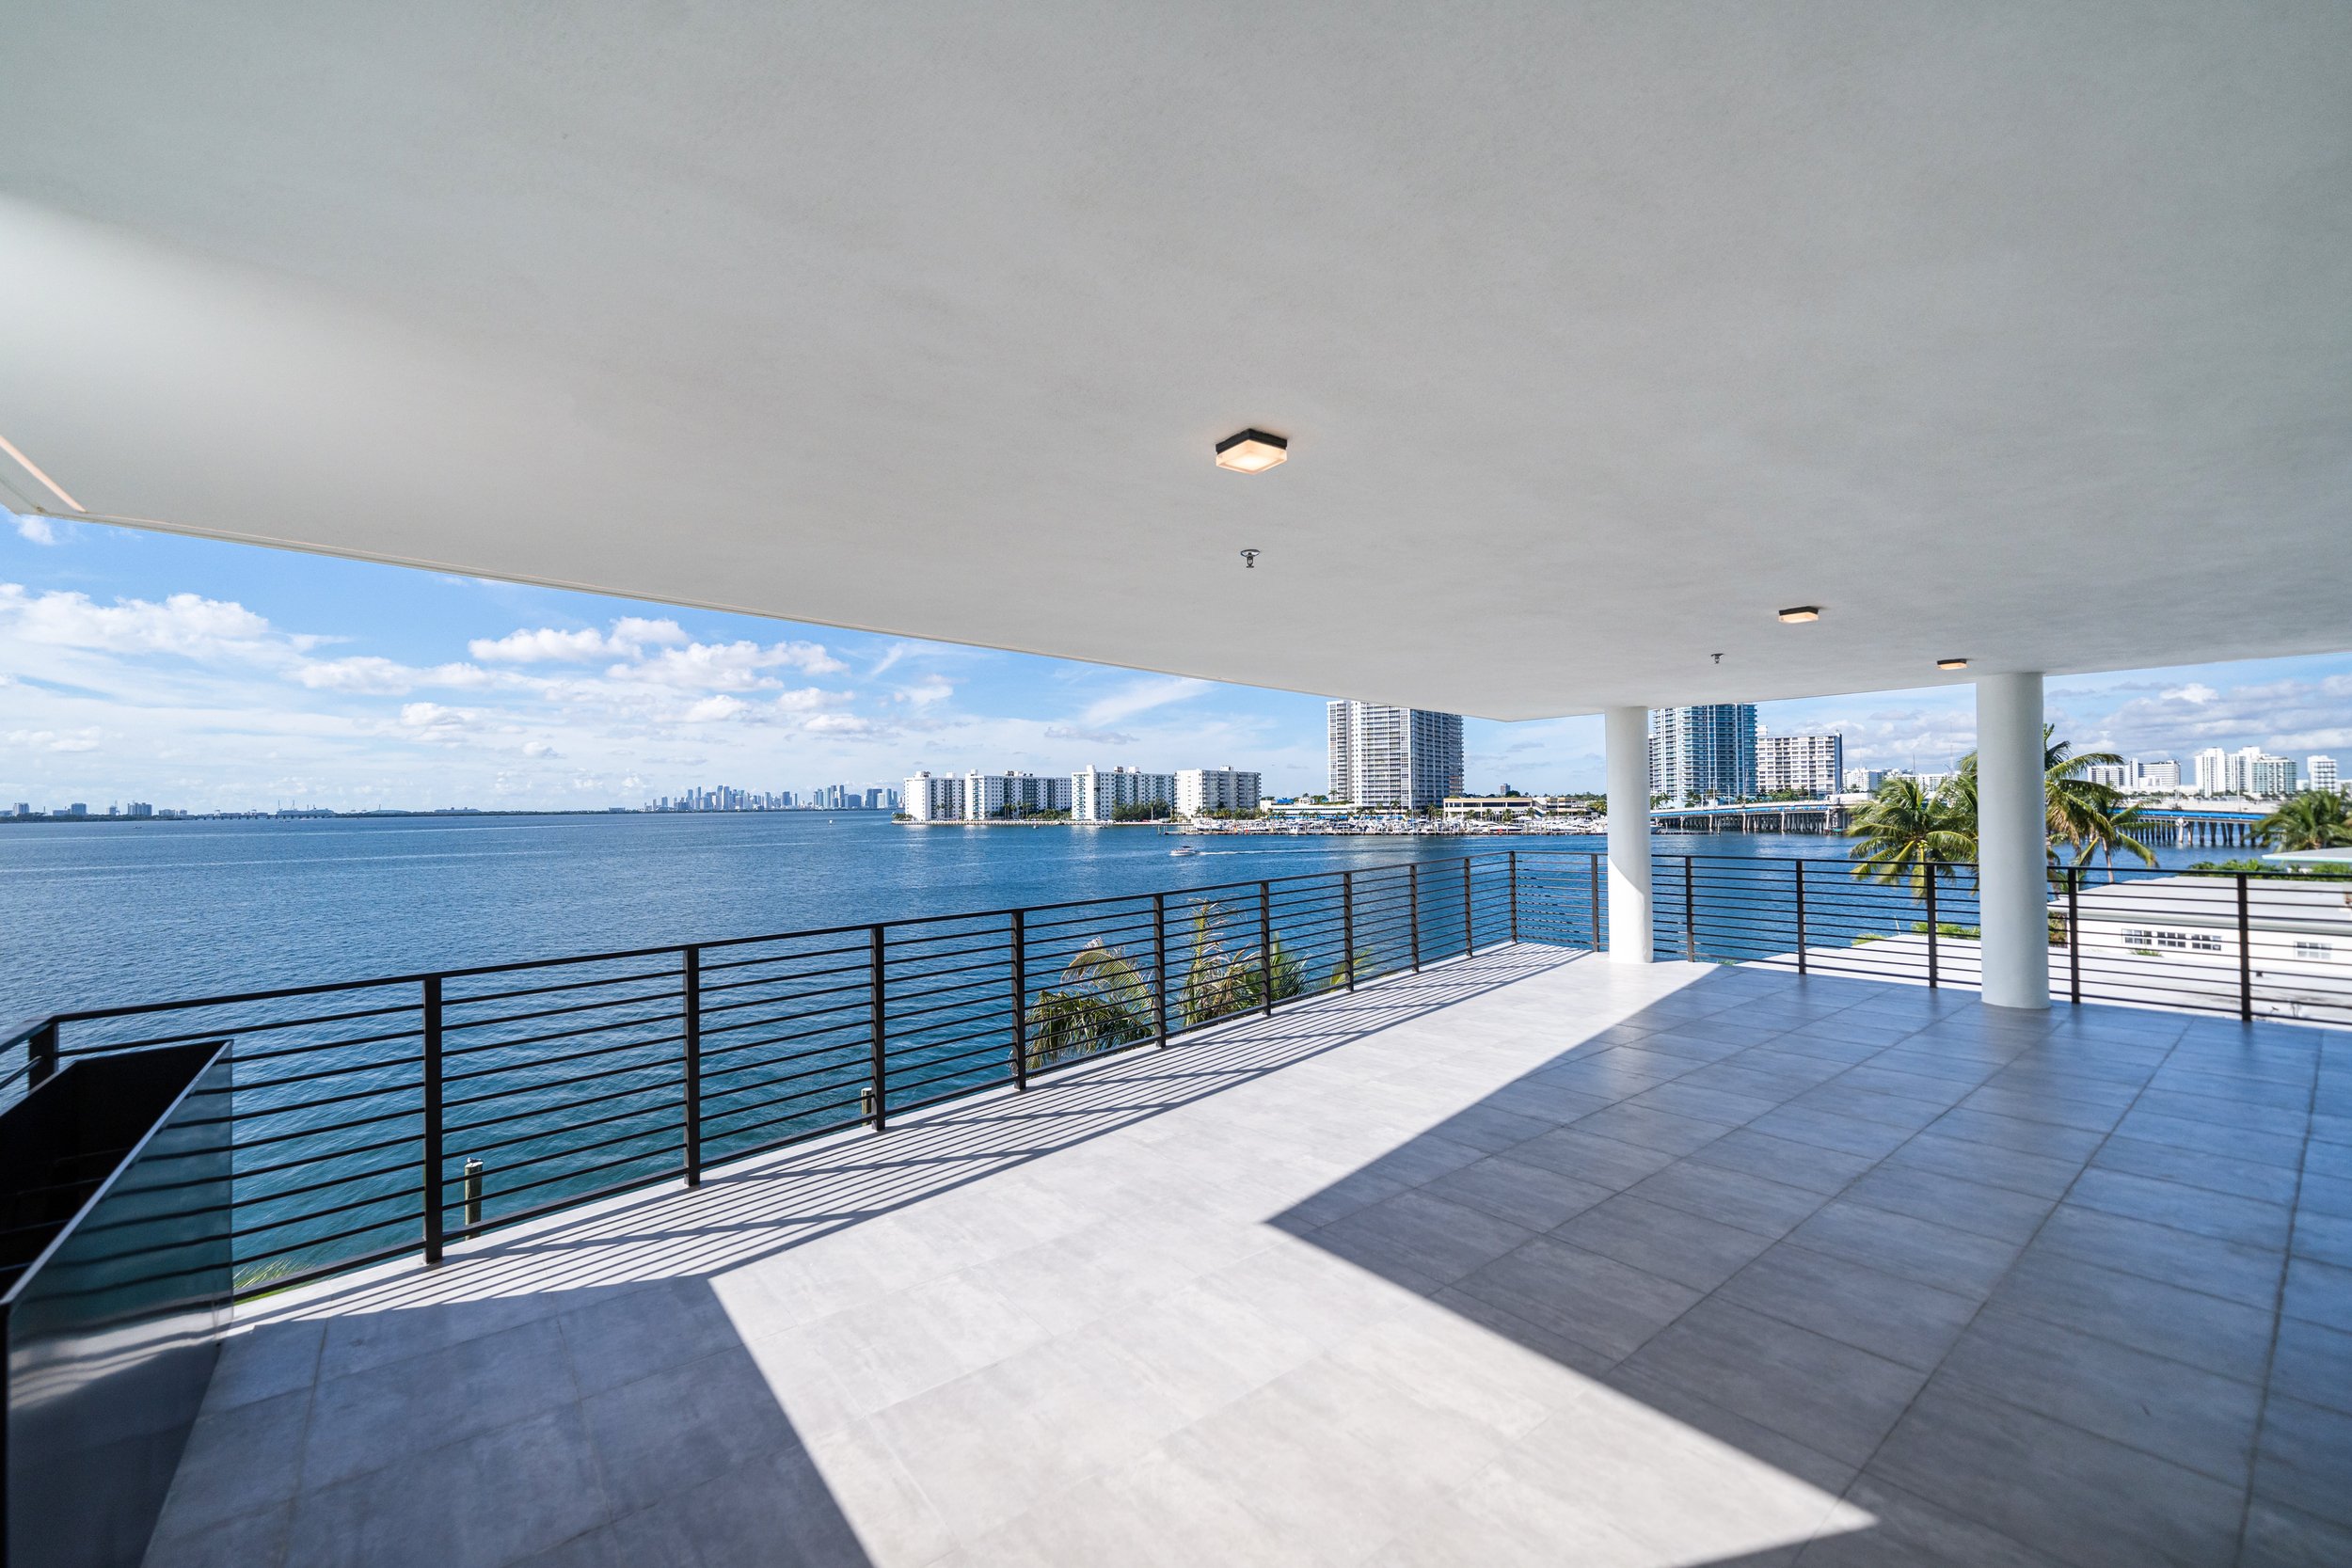 Sabal Development Sells Newly Constructed Luxury Waterfront Apartment Building On Miami Beach's Isle of Normandy 129.jpg